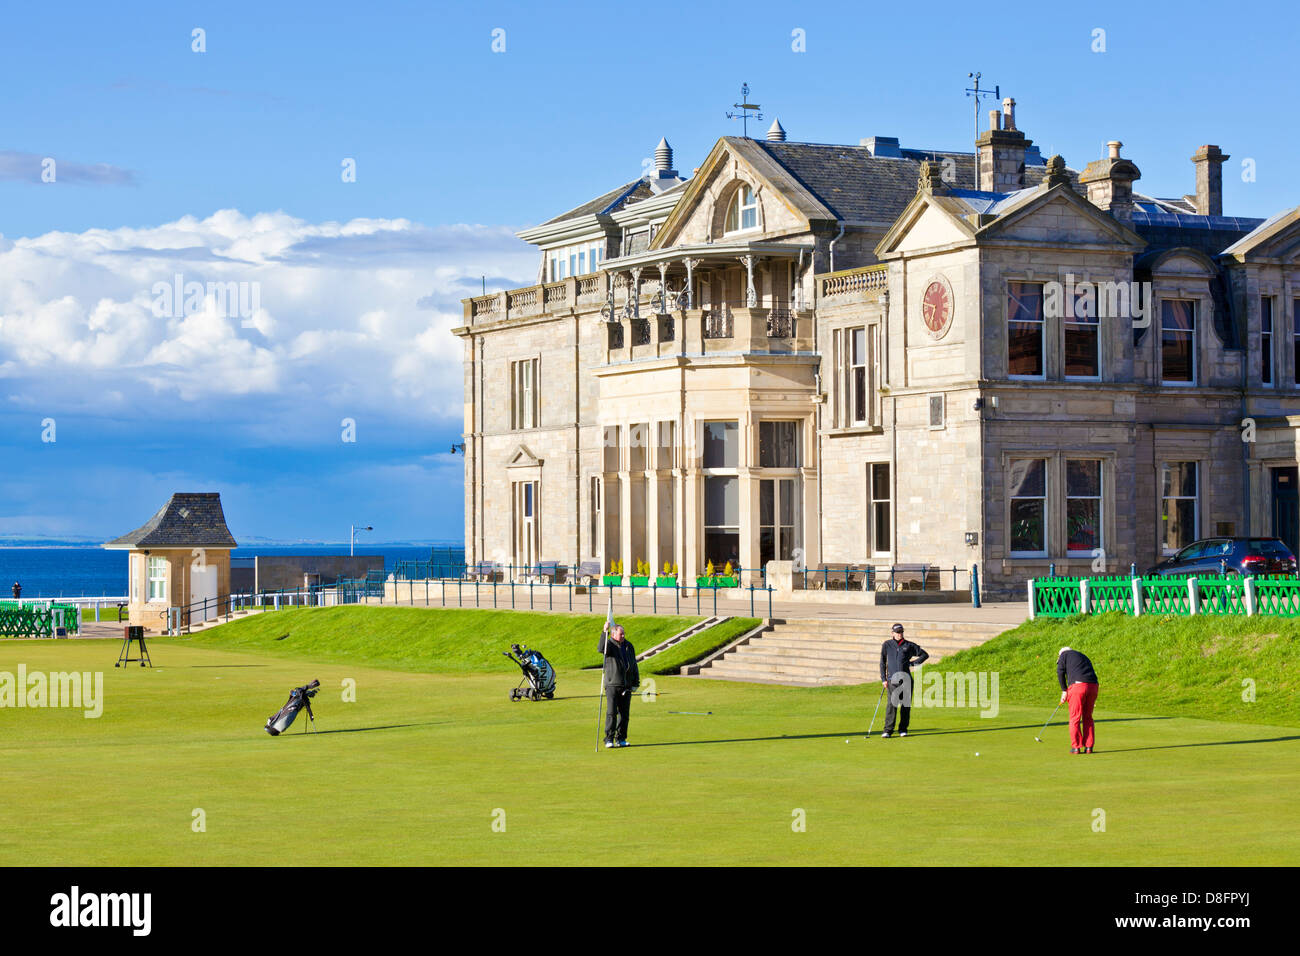 Playing golf The Royal and Ancient Golf Club of St Andrews golf course and  club house St Andrews Fife Scotland UK GB EU Europe Stock Photo - Alamy